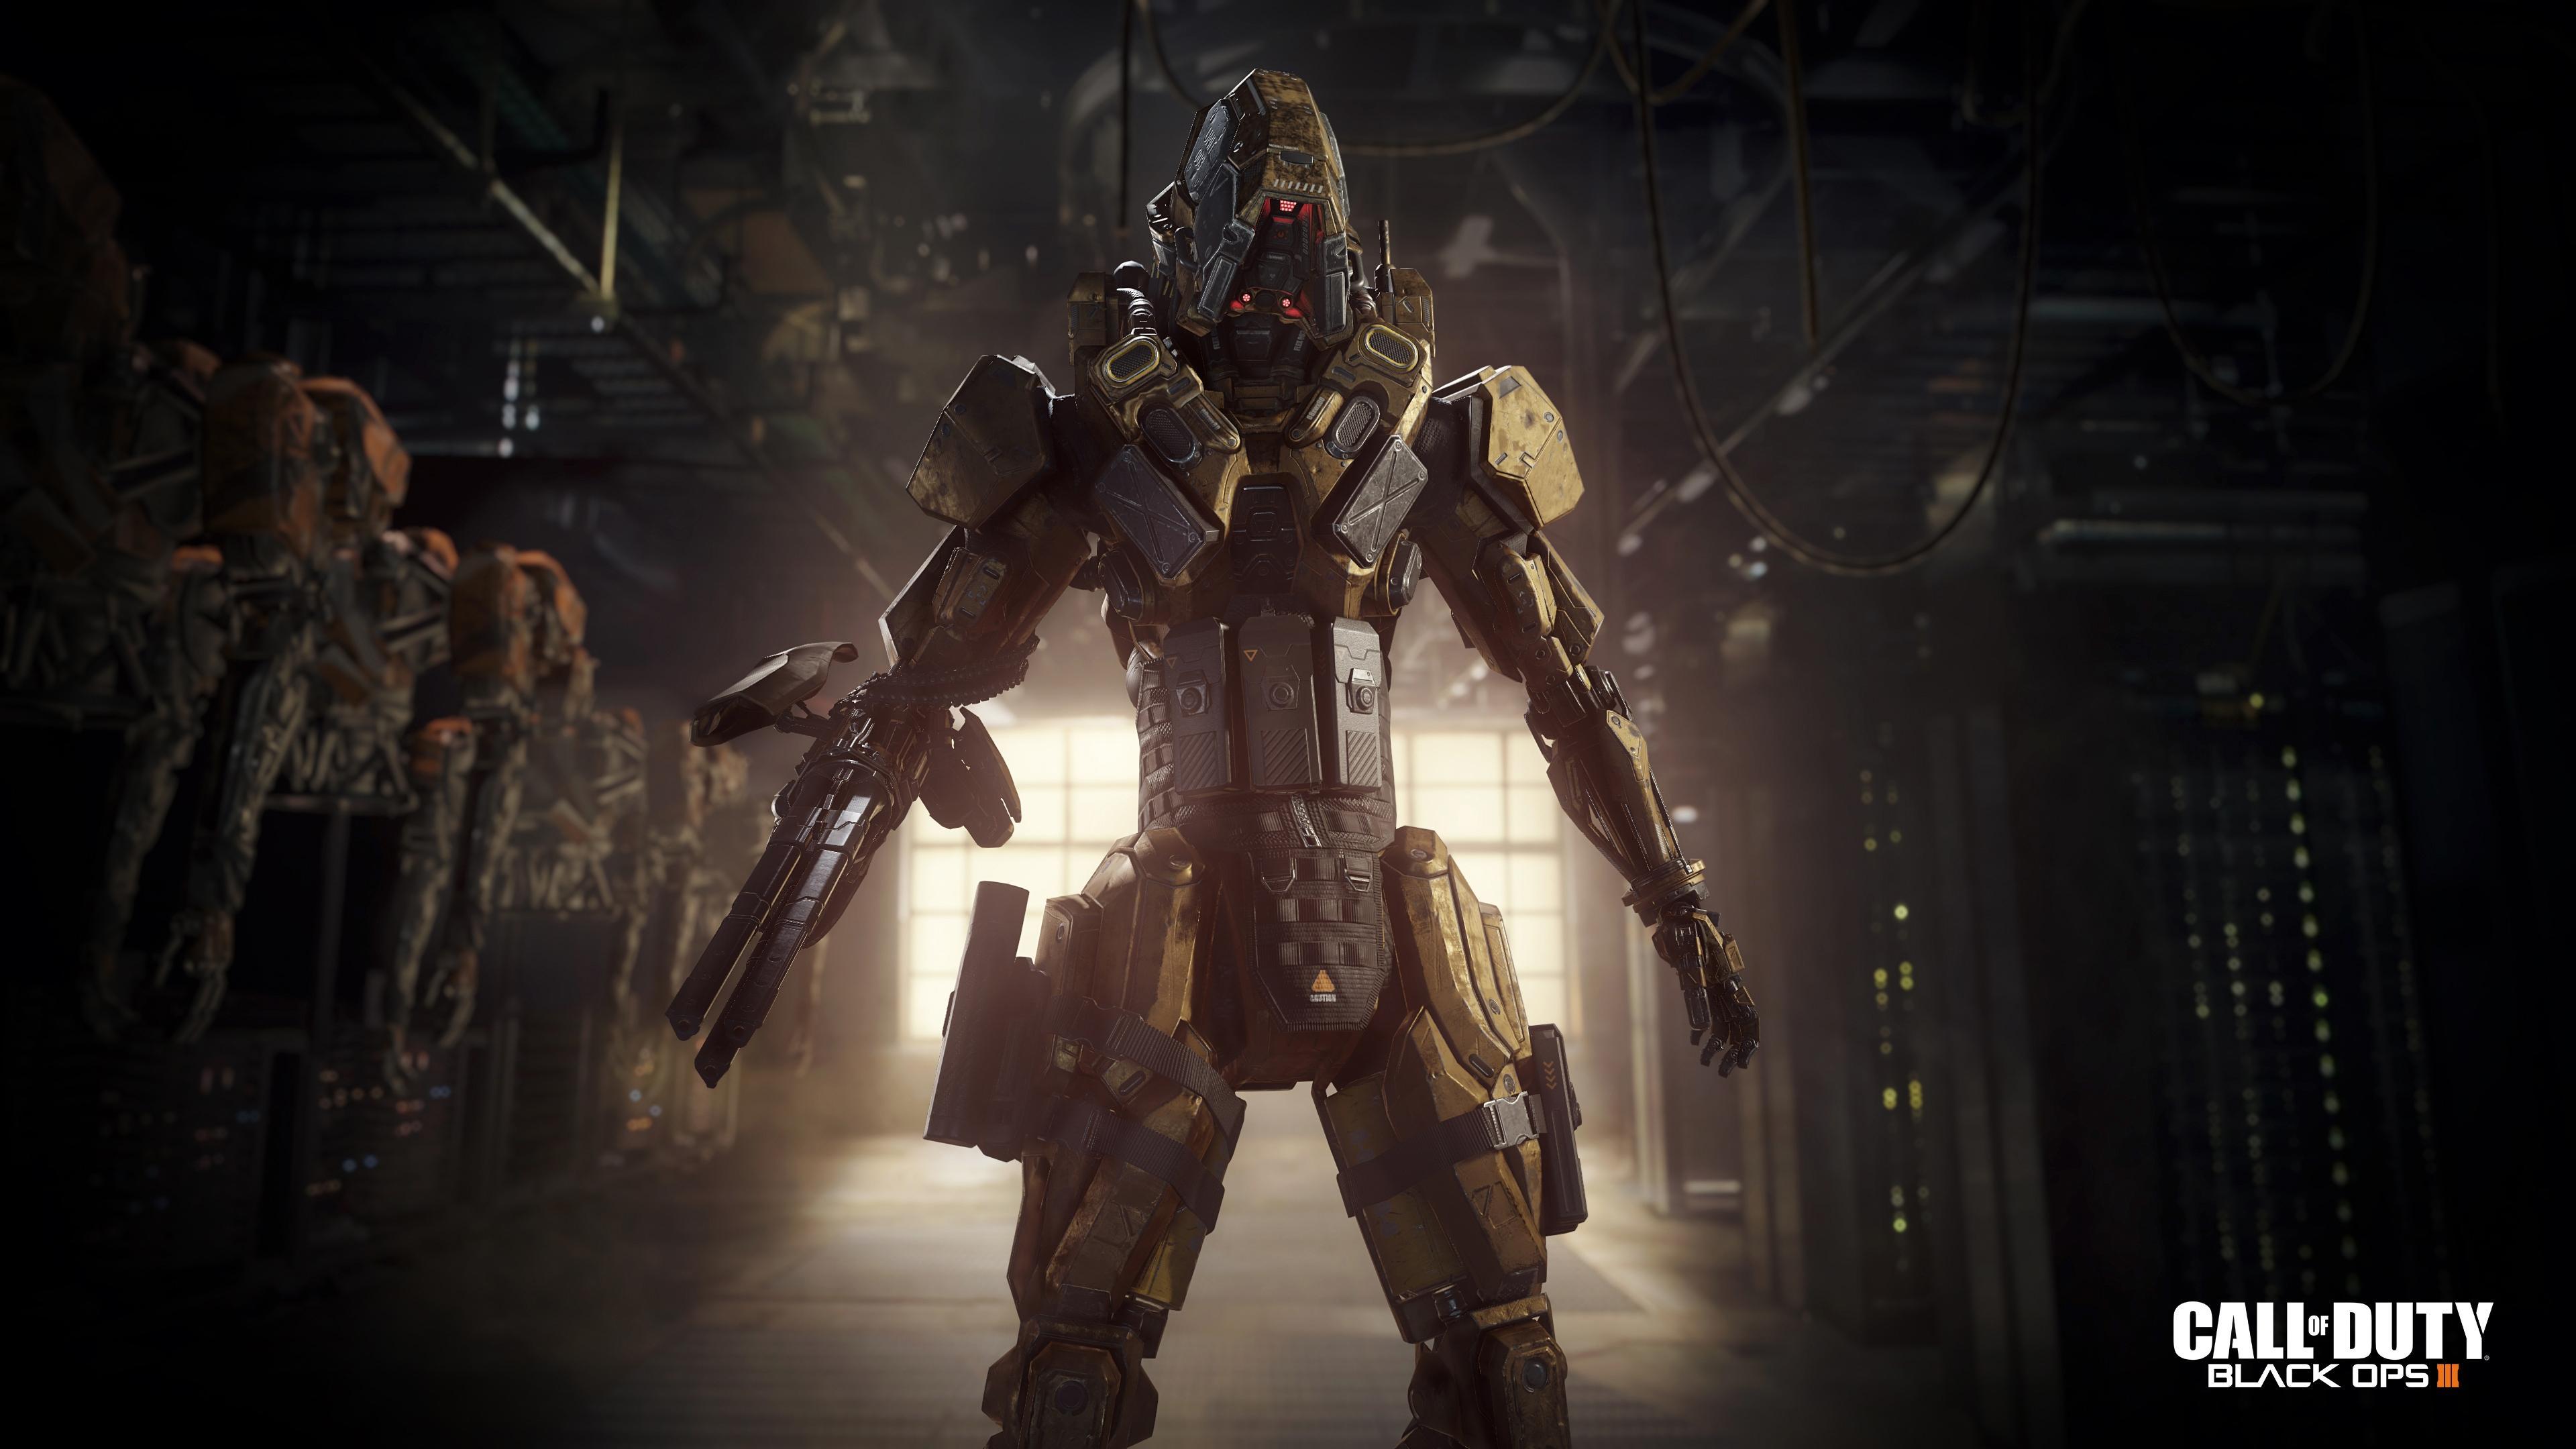 Download 3840x2160 Call Of Duty: Black Ops Robot, Sci Fi